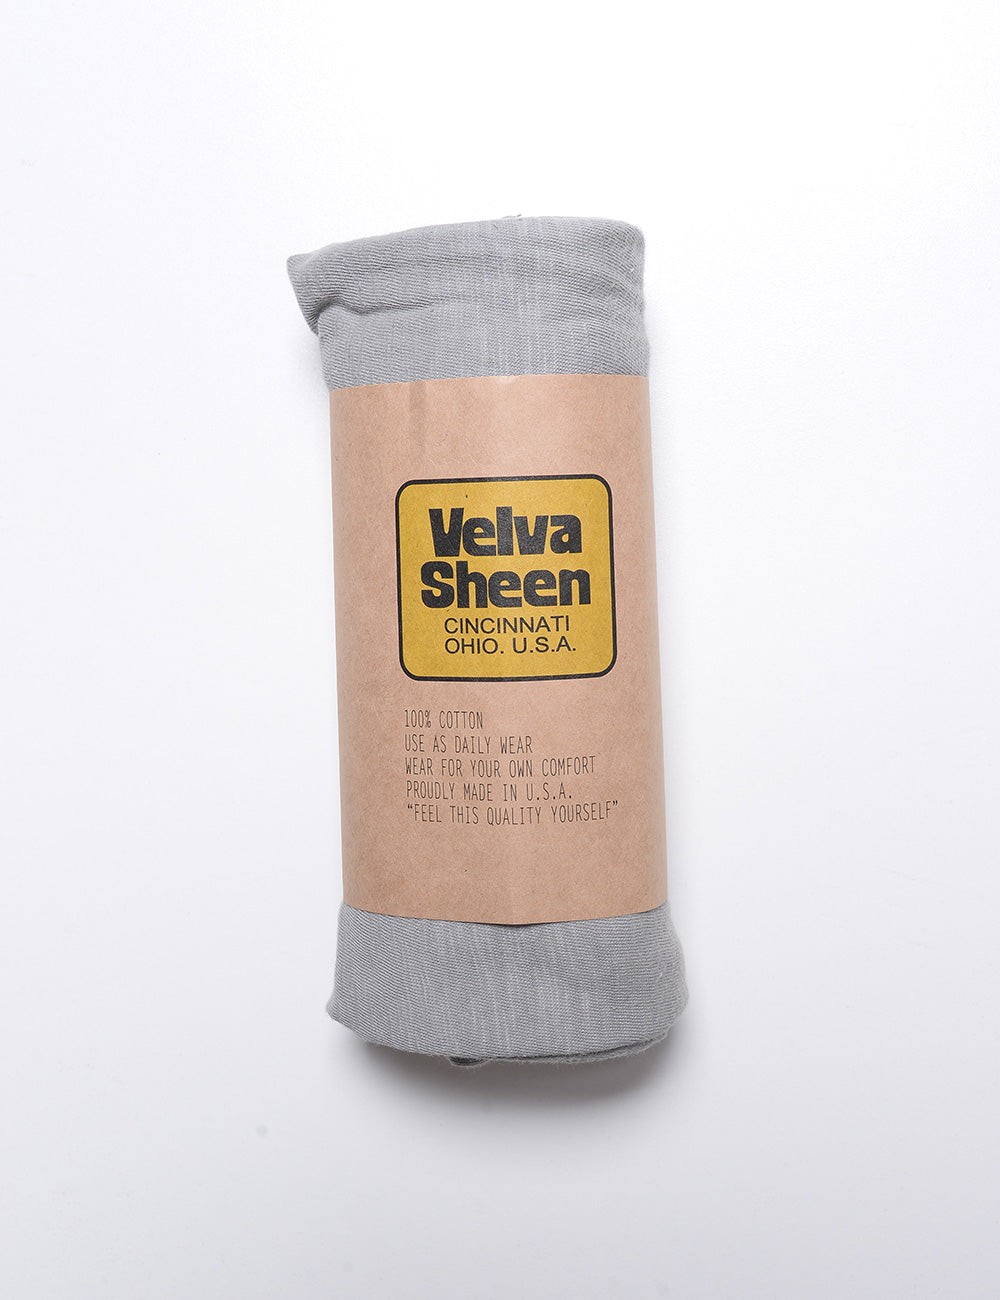 Photo of Velva Sheen Crewneck T-Shirt in Concrete rolled in packaging